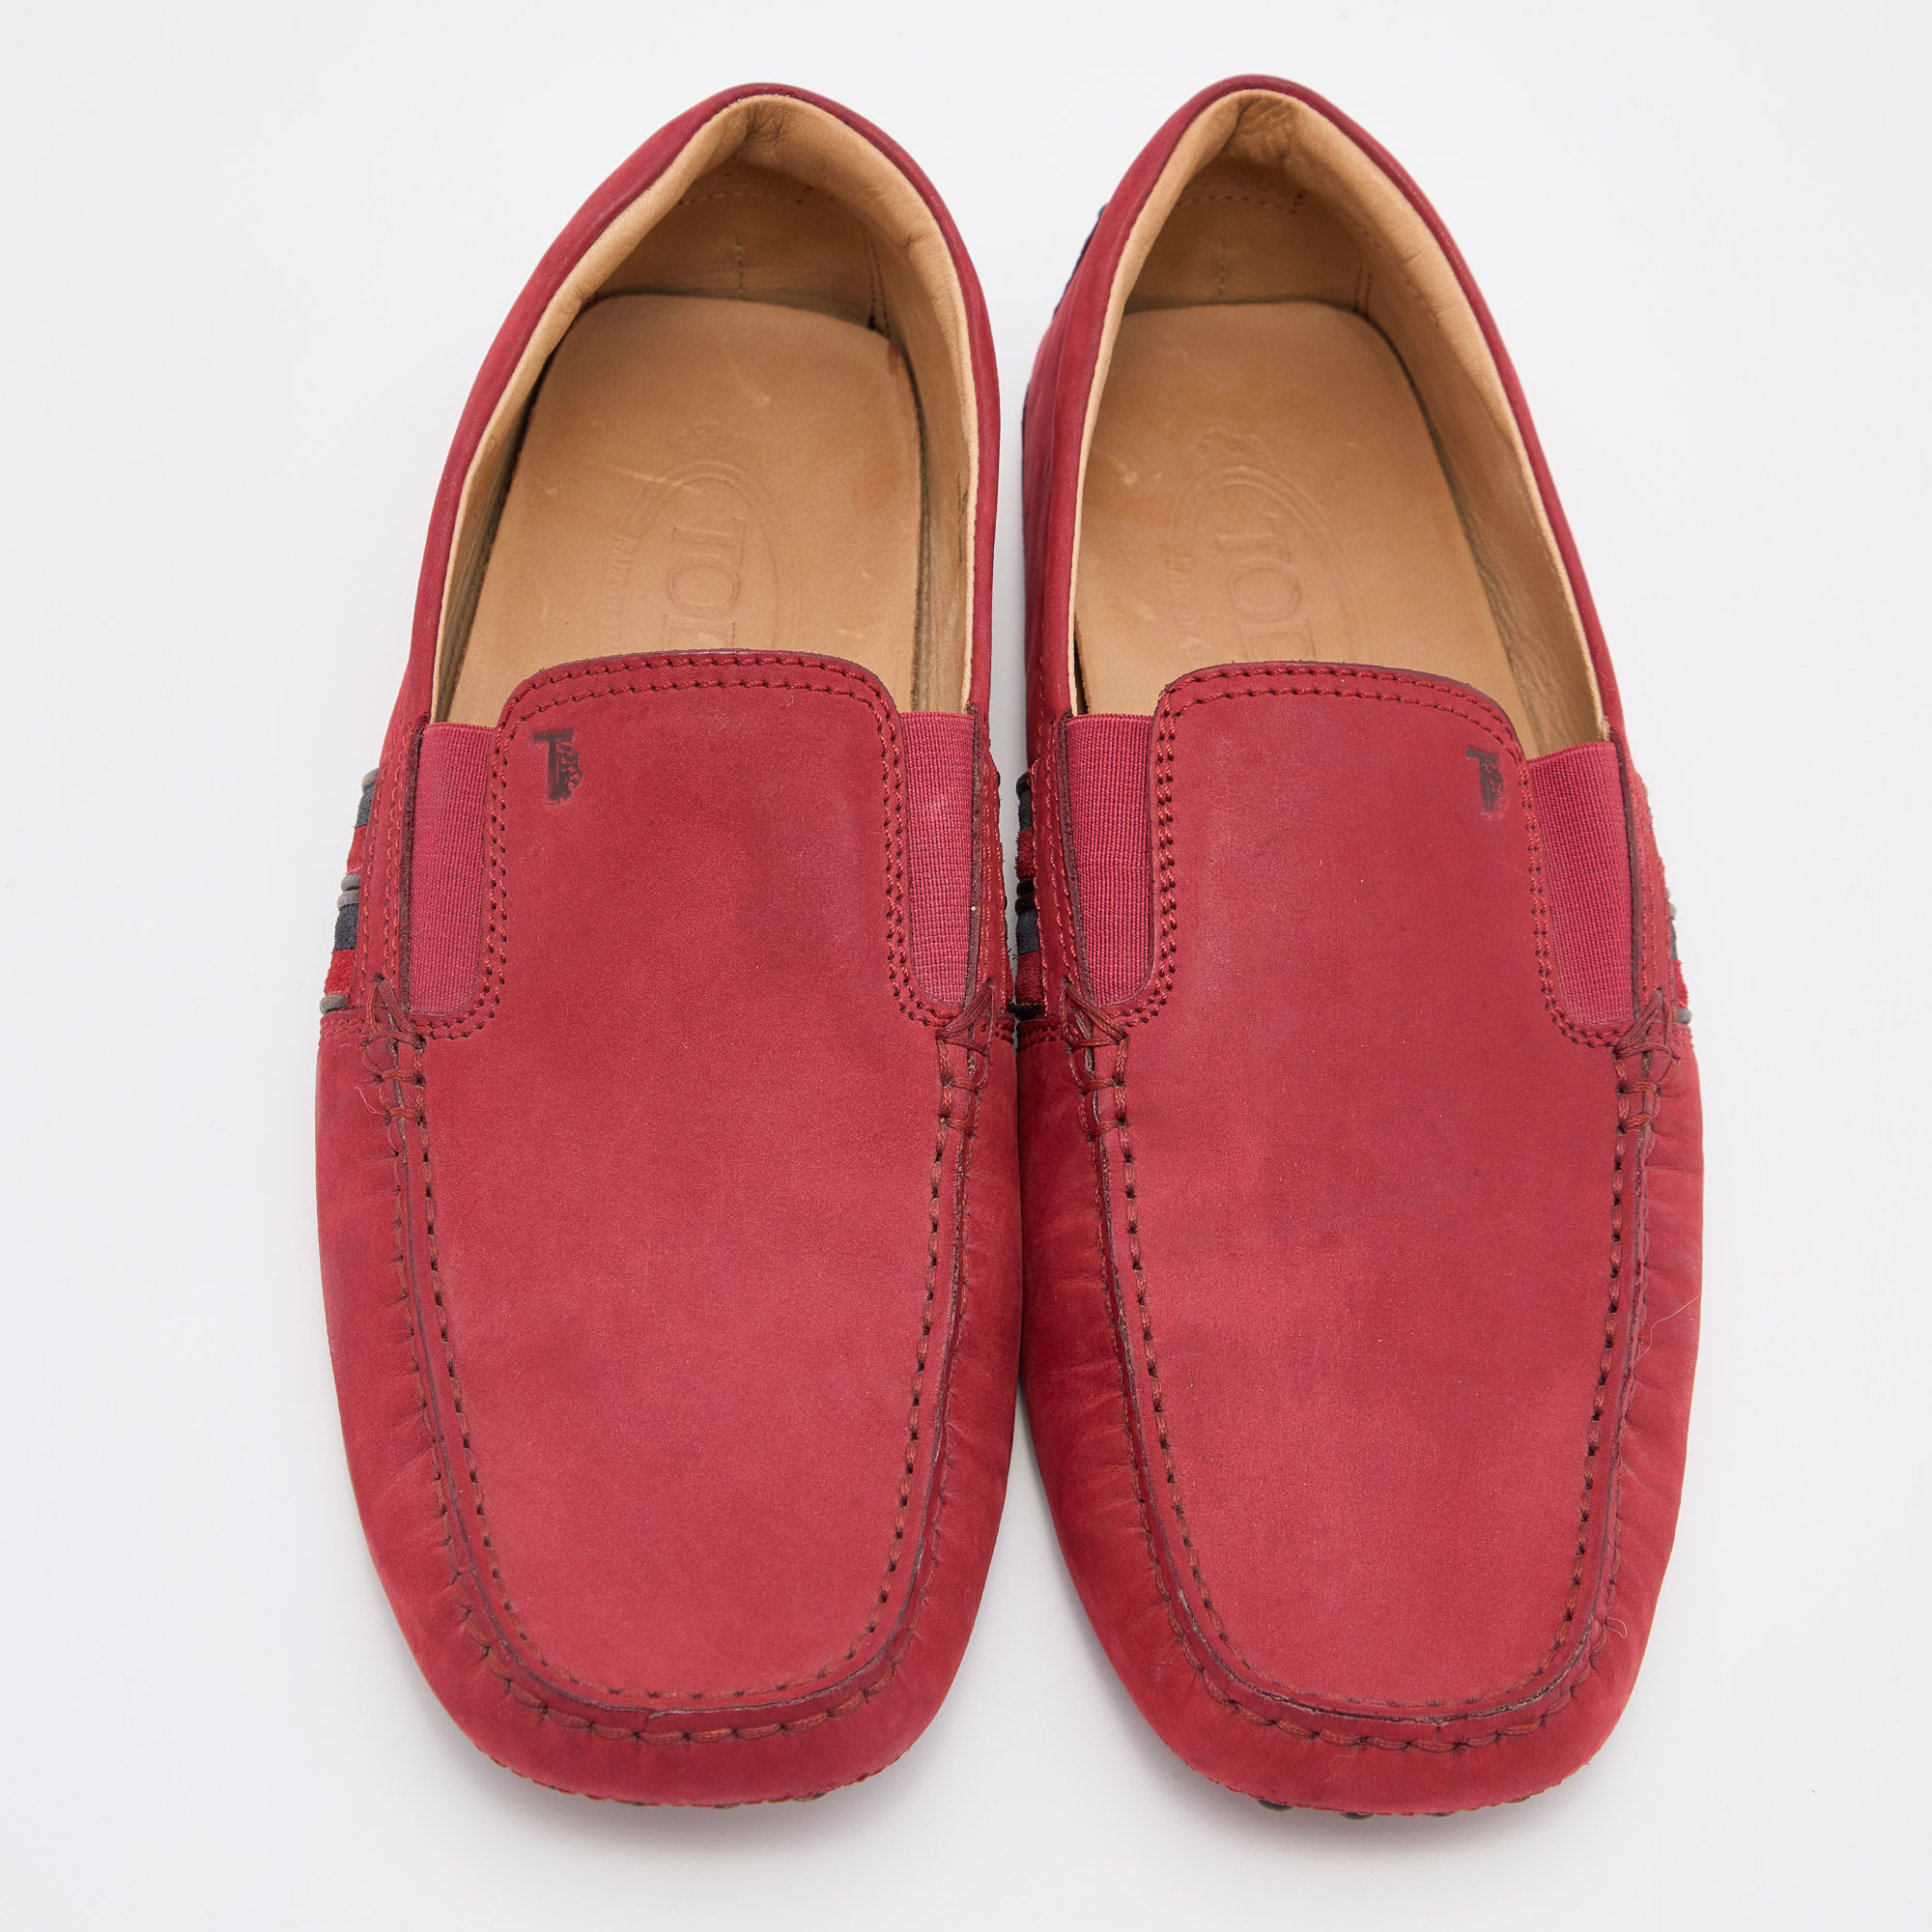 Tods Red Leather Slip On Loafers Size 39.5